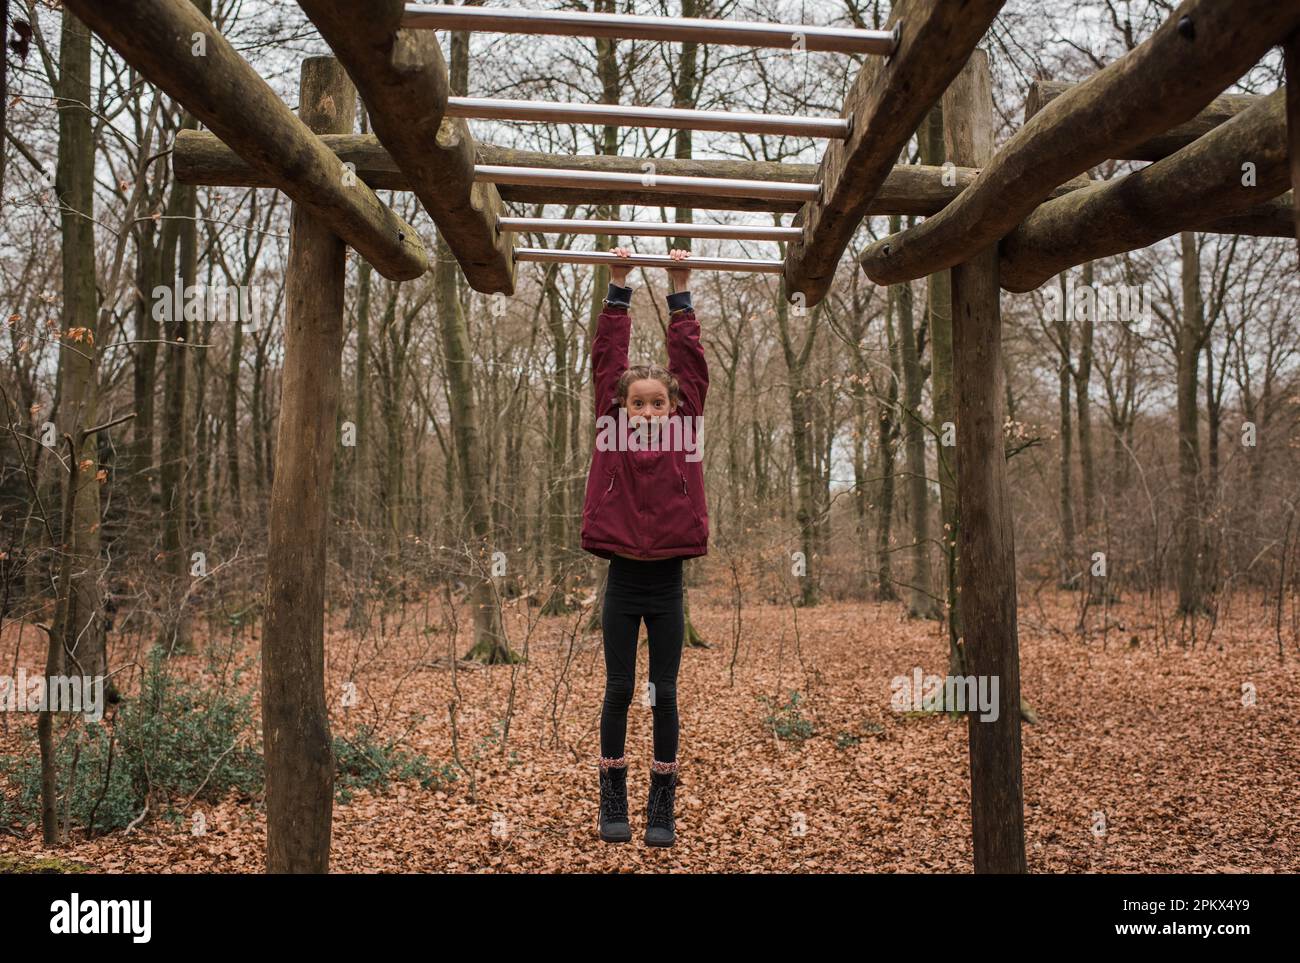 Girl hanging on monkey bars in the forest Stock Photo